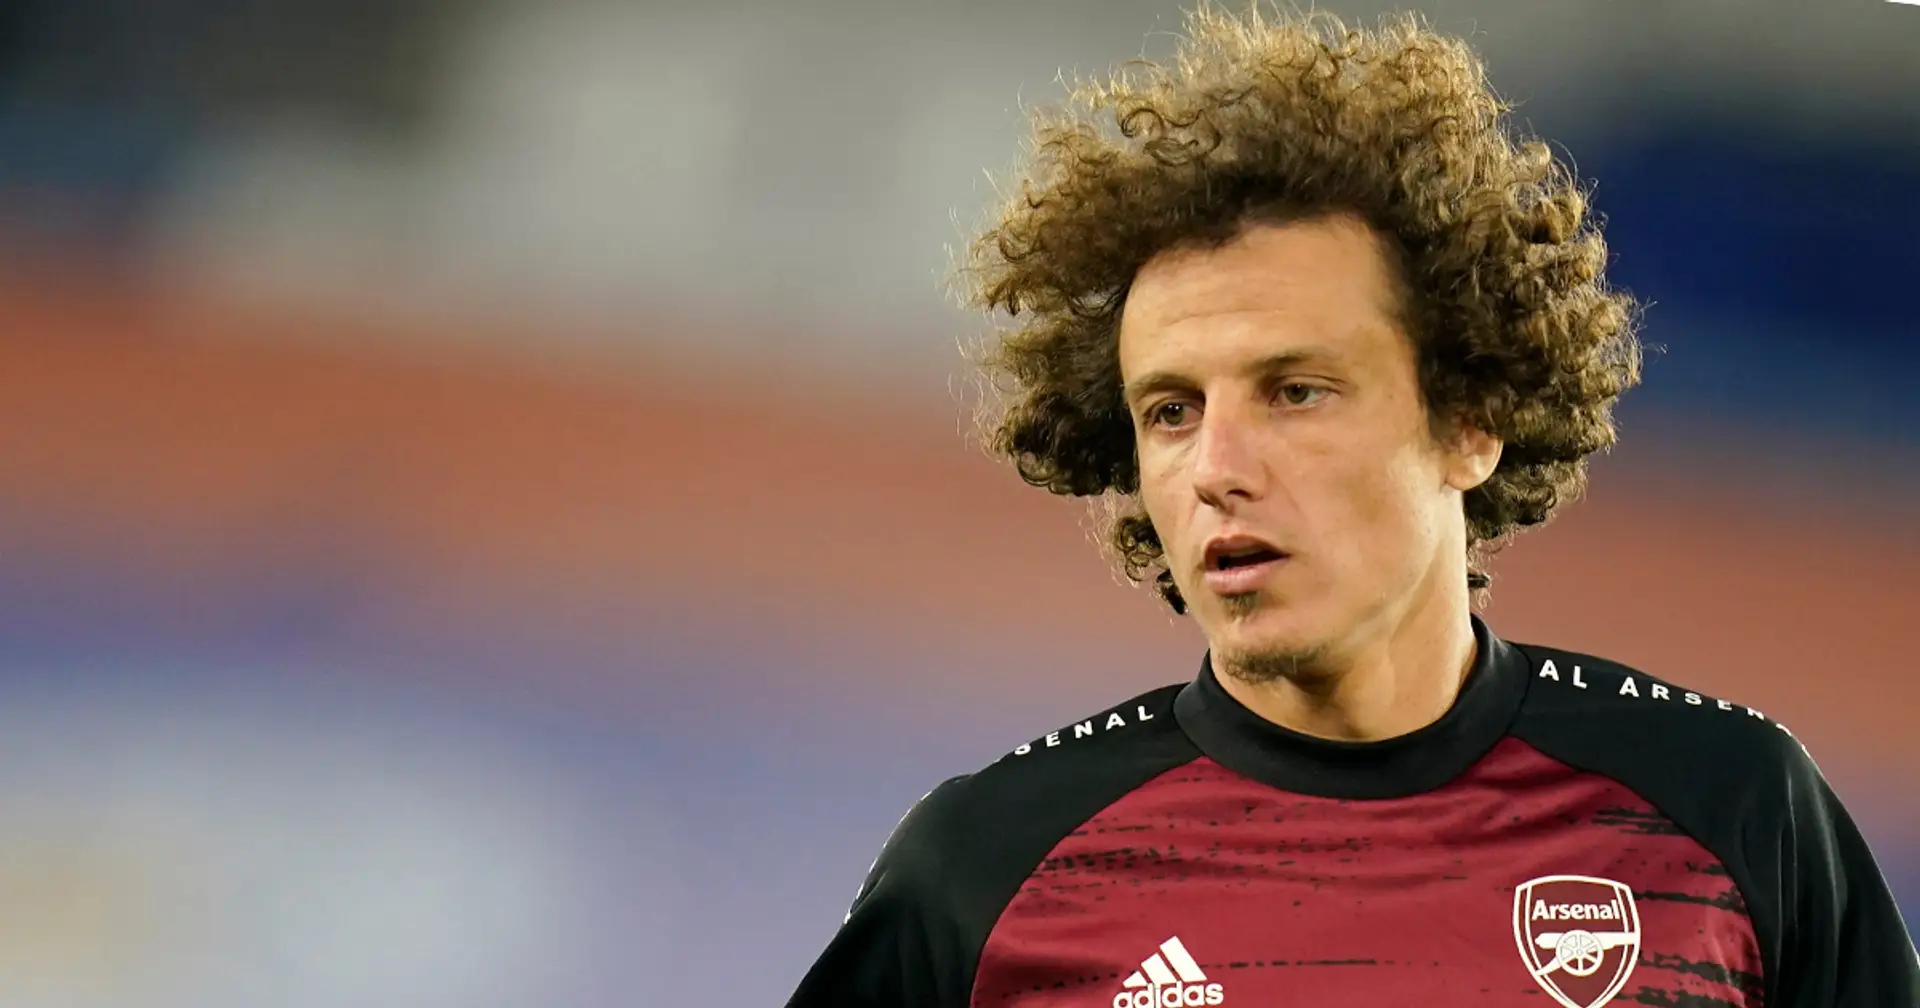 'The best feeling in the world': David Luiz becomes a father